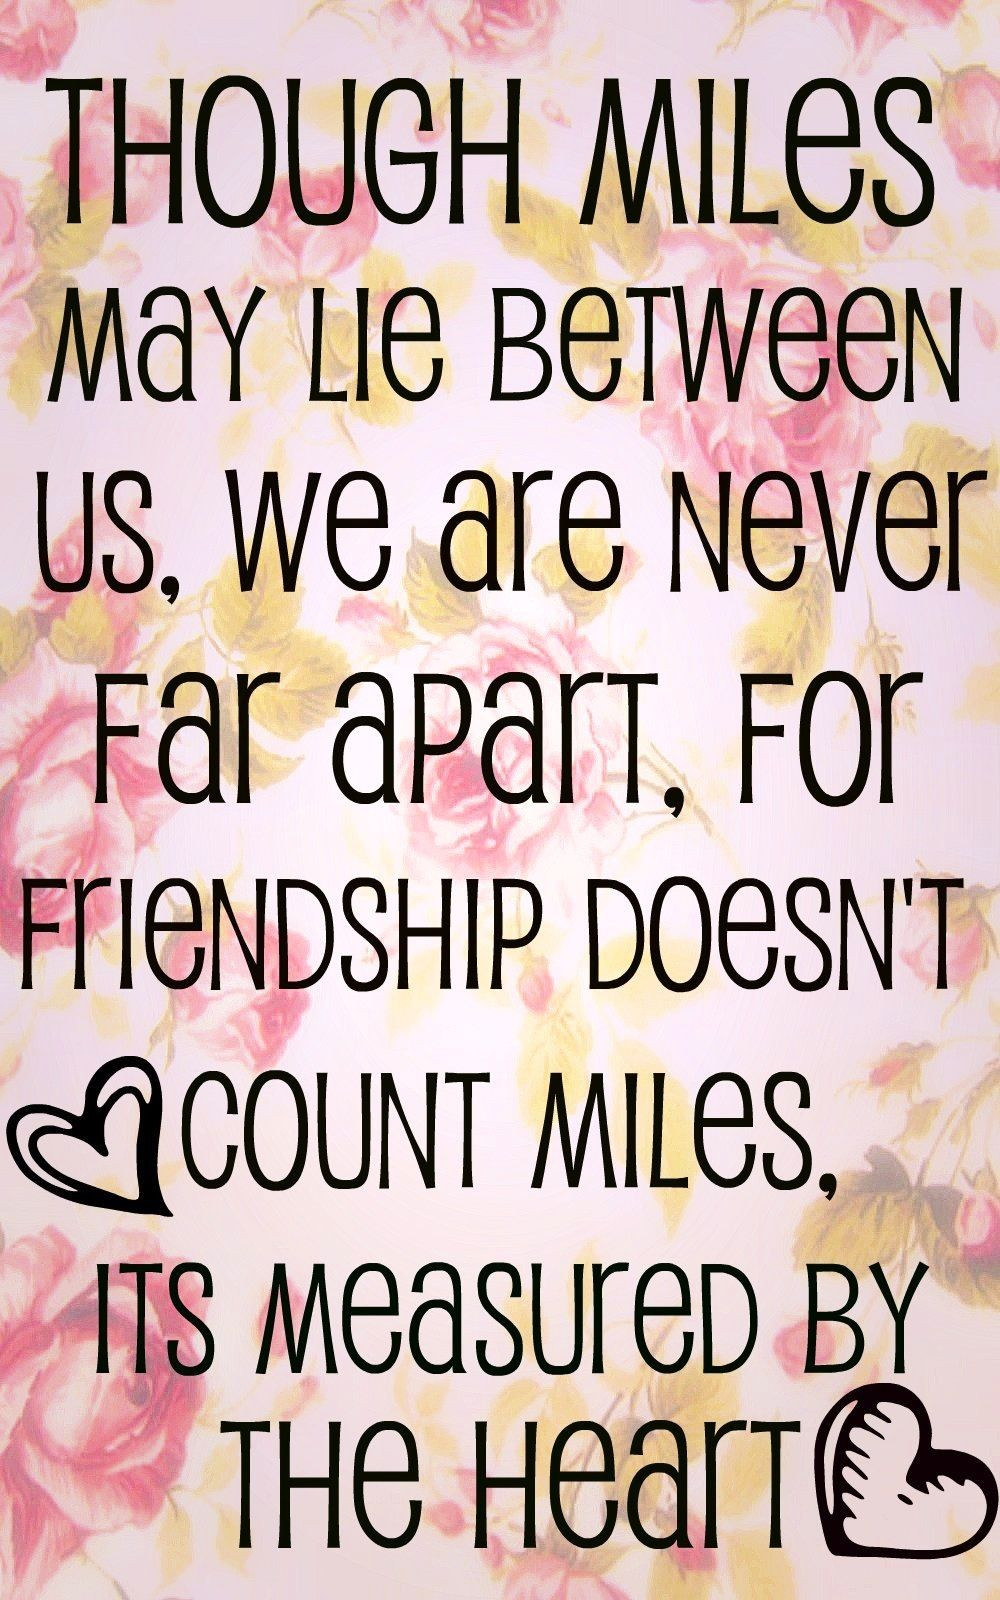 Quotes About Long Distance Friendships
 Long Distance Friendship on Pinterest